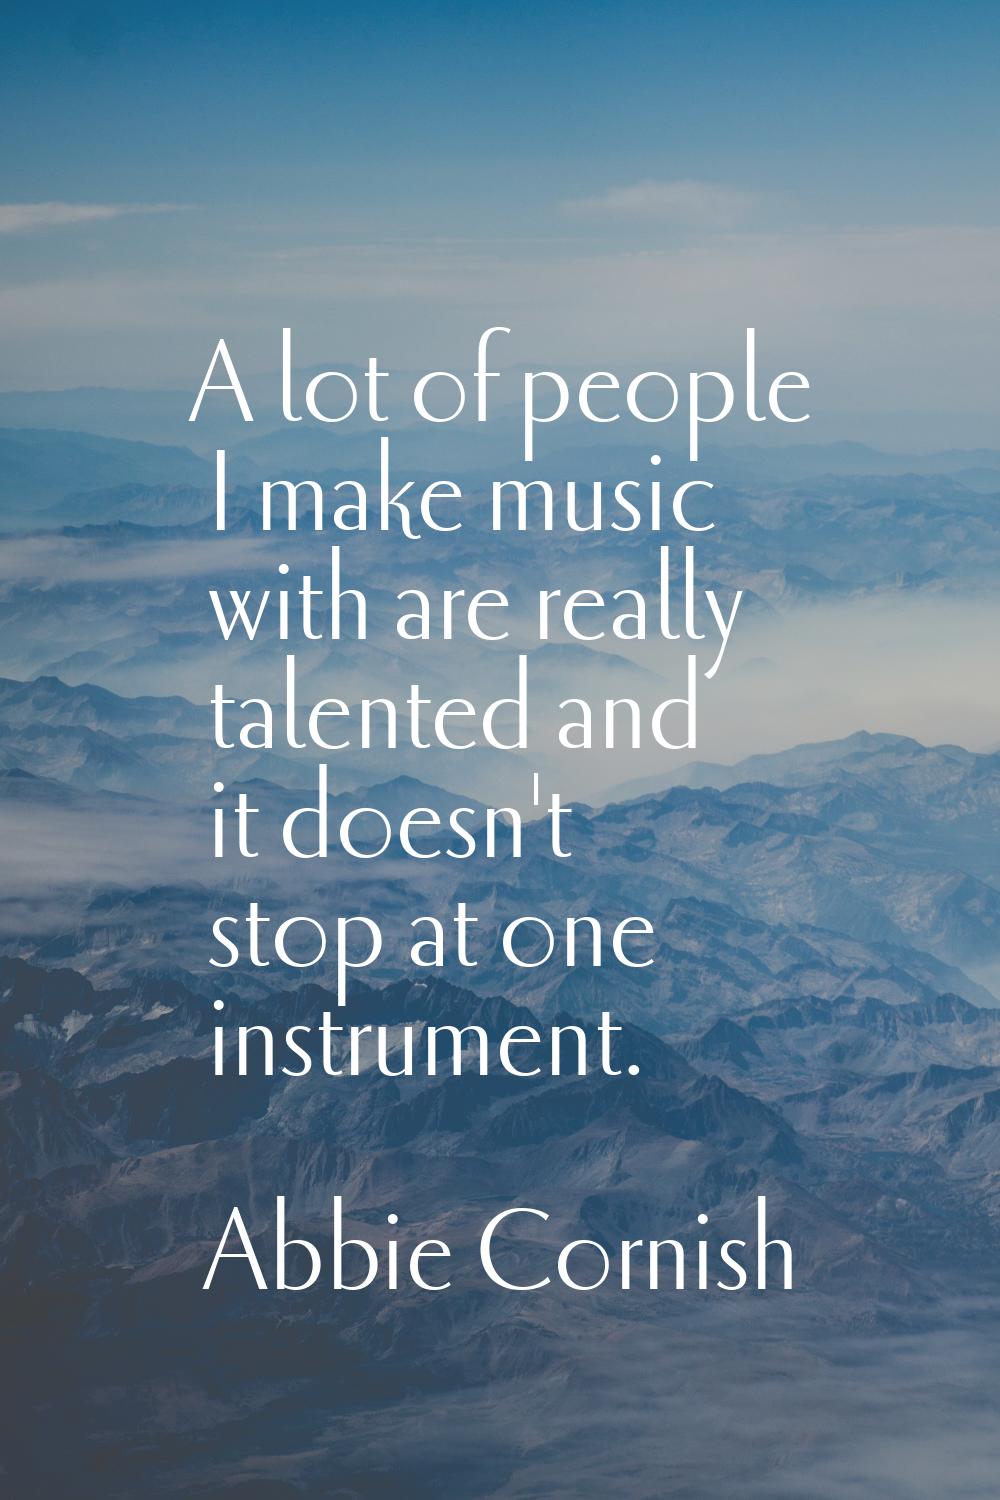 A lot of people I make music with are really talented and it doesn't stop at one instrument.